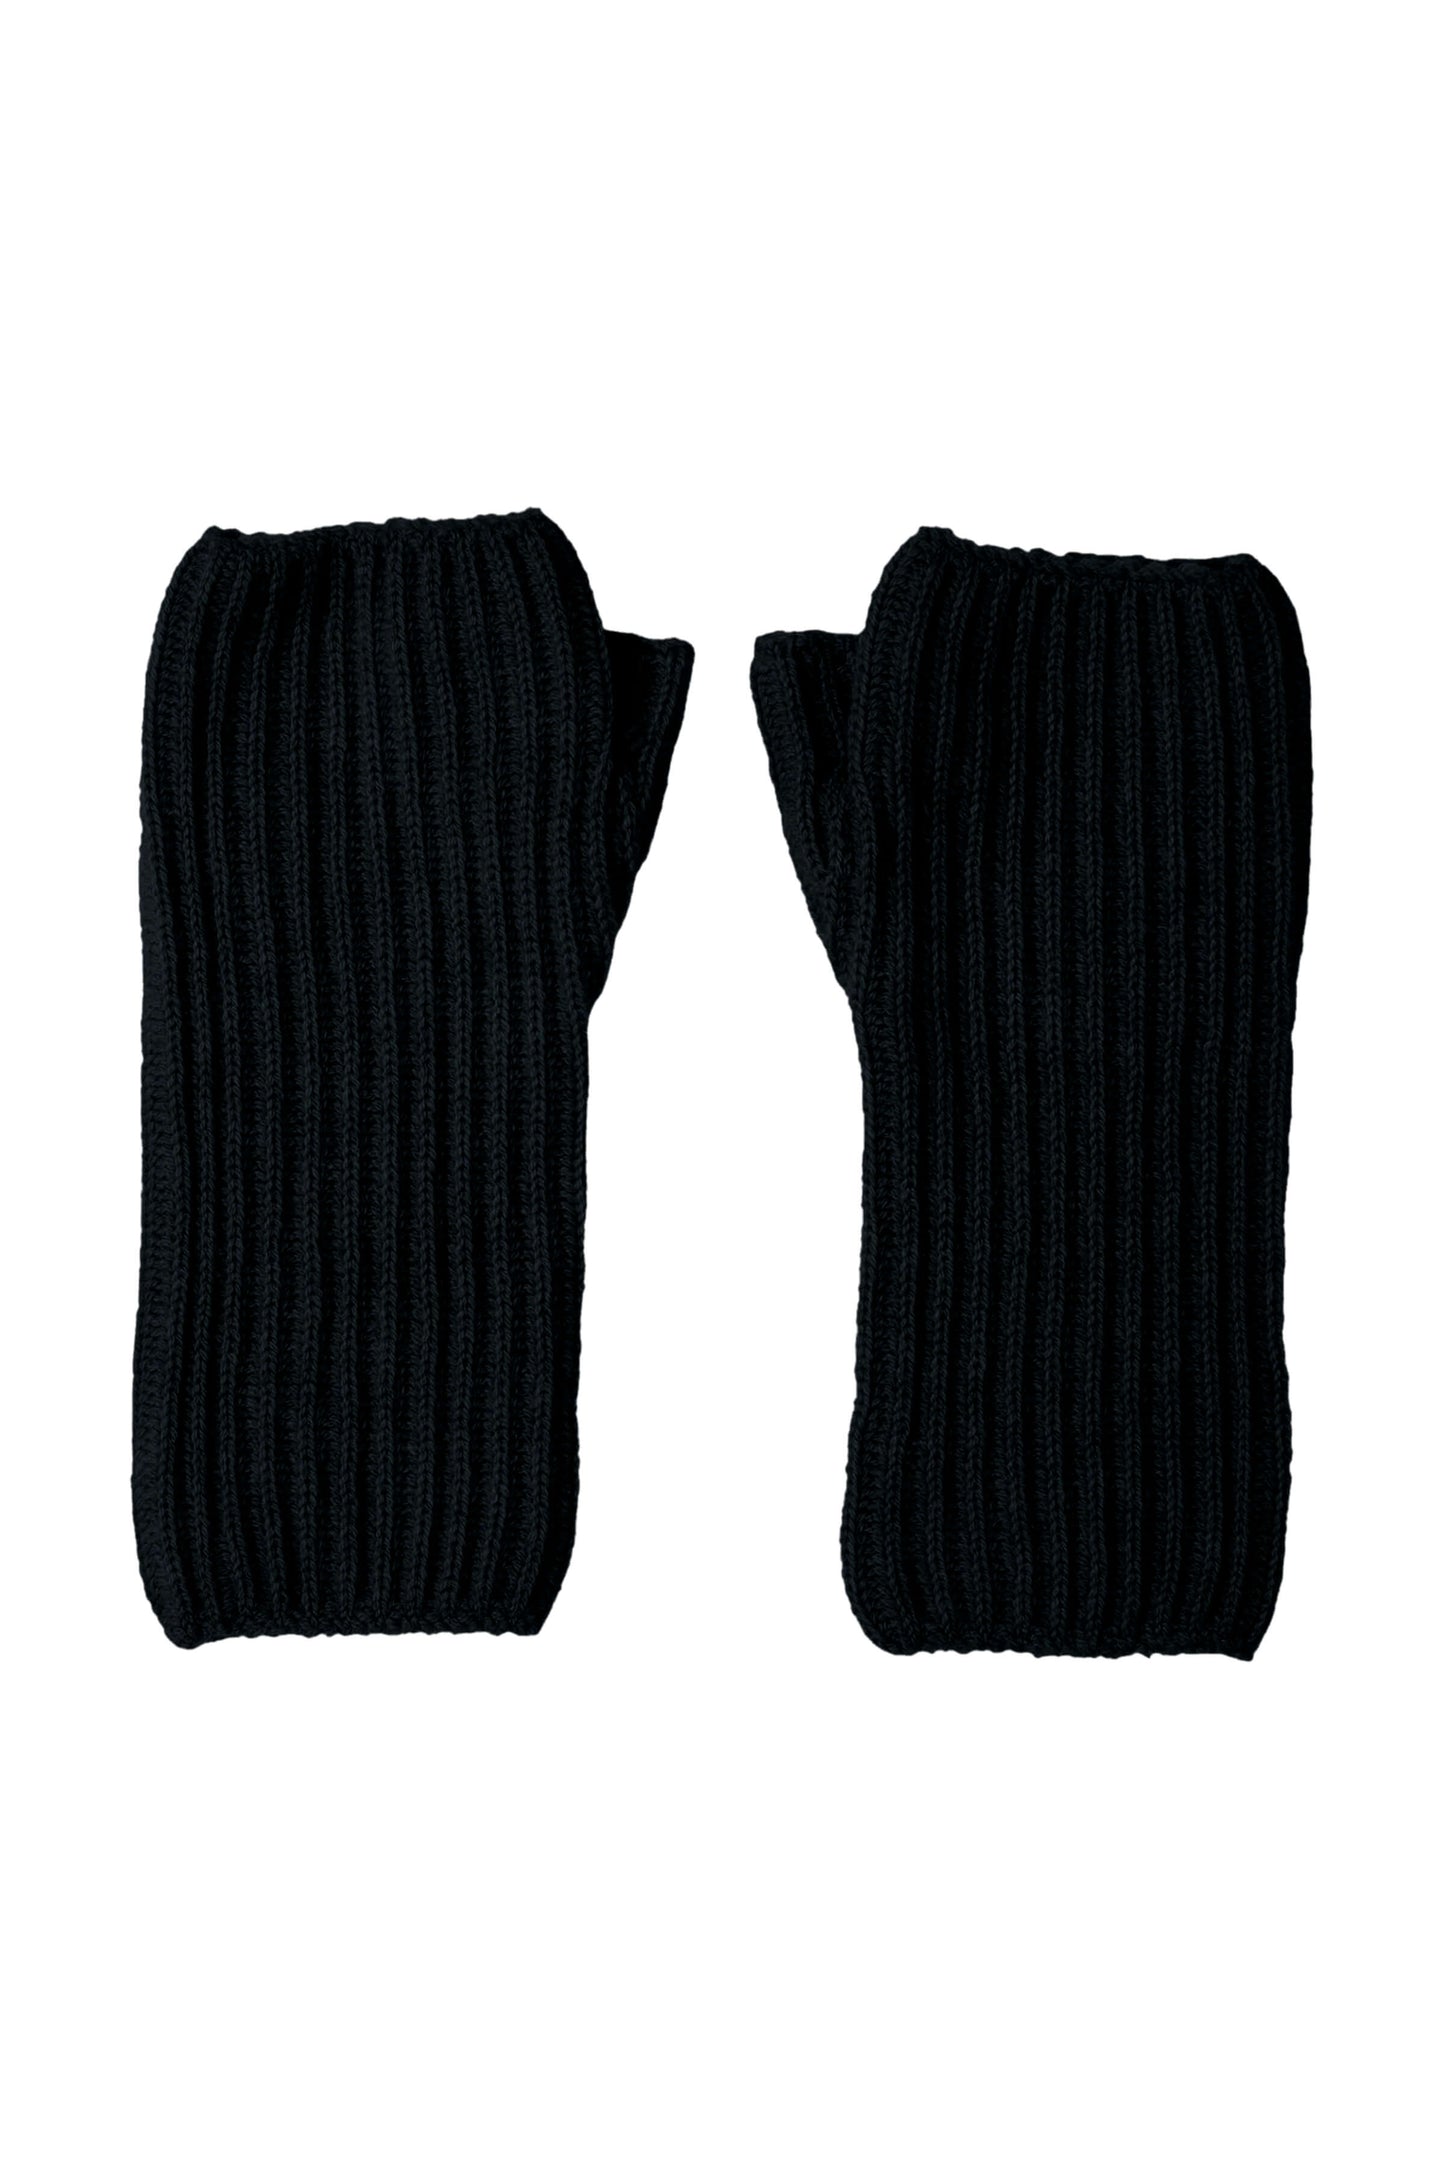 Johnstons of Elgin AW24 Knitted Accessory Black Ribbed Cashmere Wrist Warmers HAE02681SA0900N/A